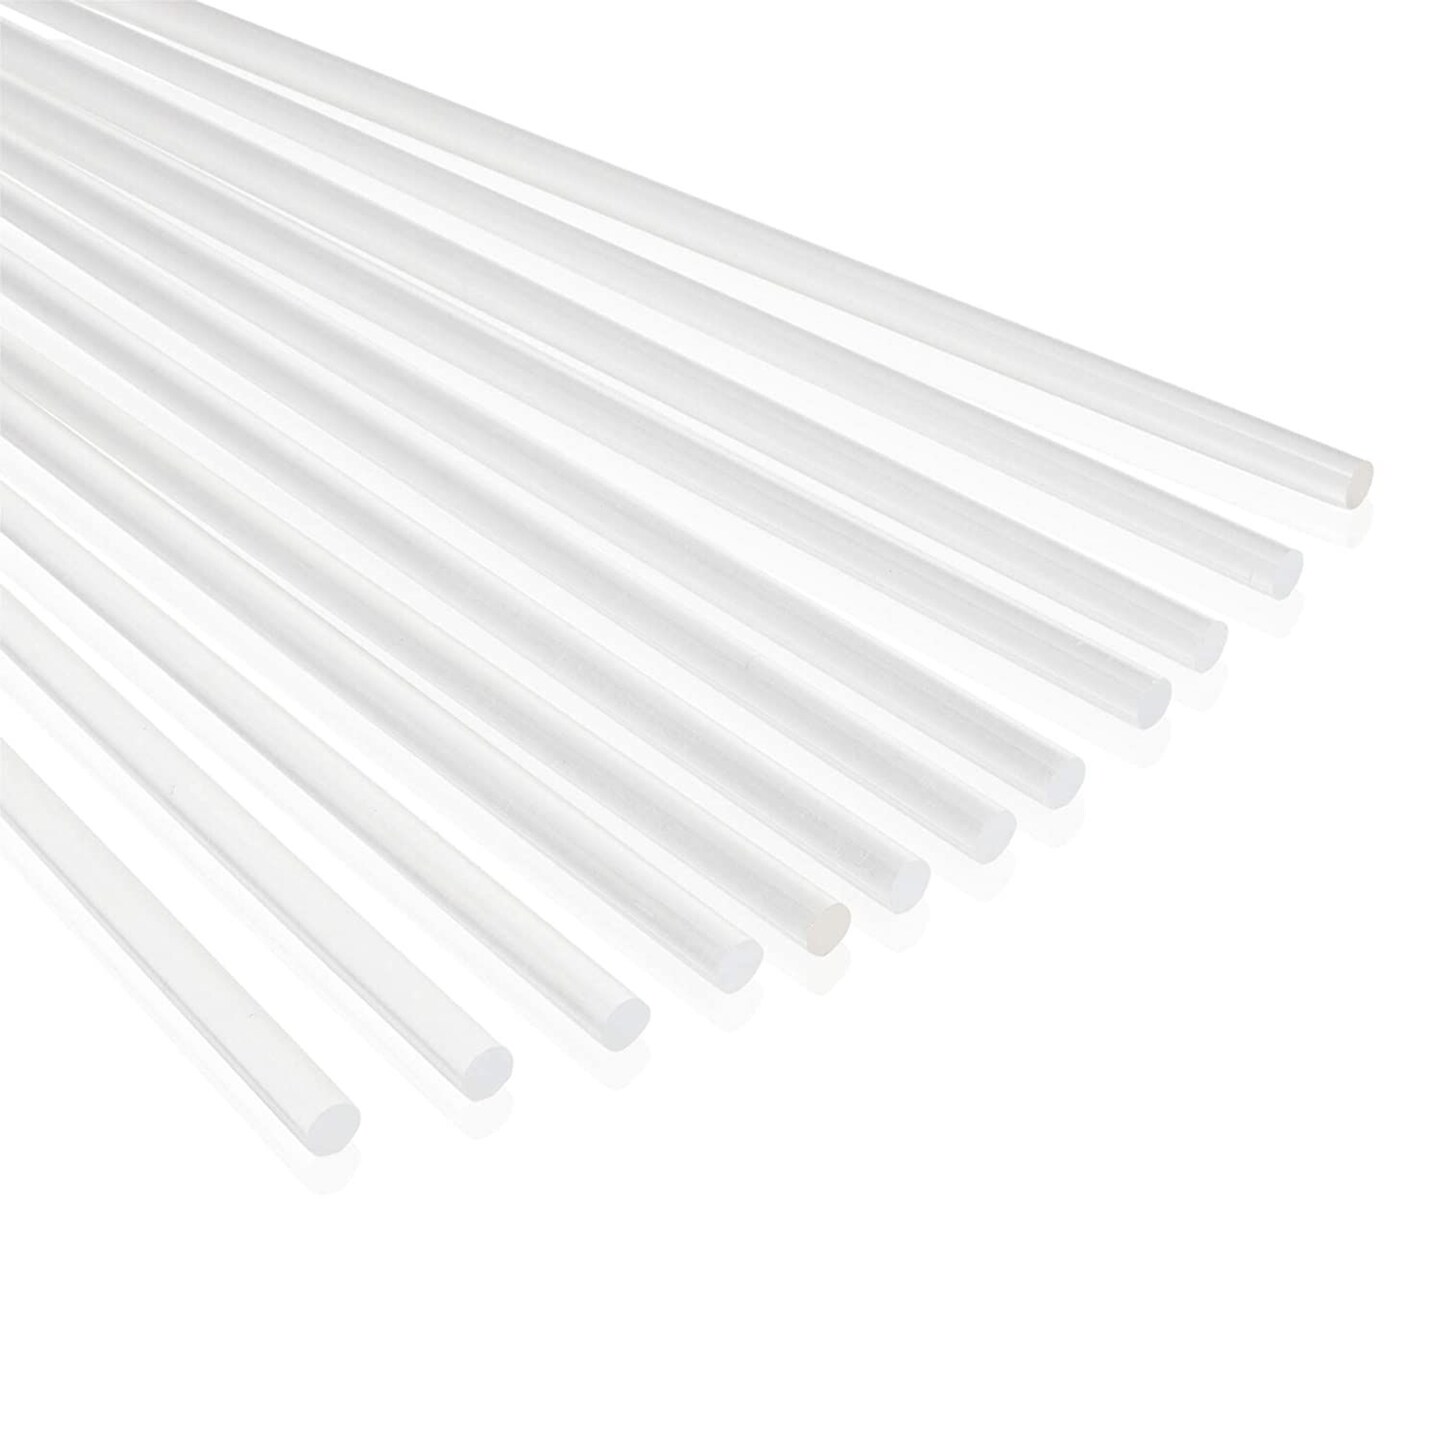 12 Pack Plastic Dowel Rods for DIY Projects, Clear Acrylic Sticks for Party  Decorations (0.25x12)